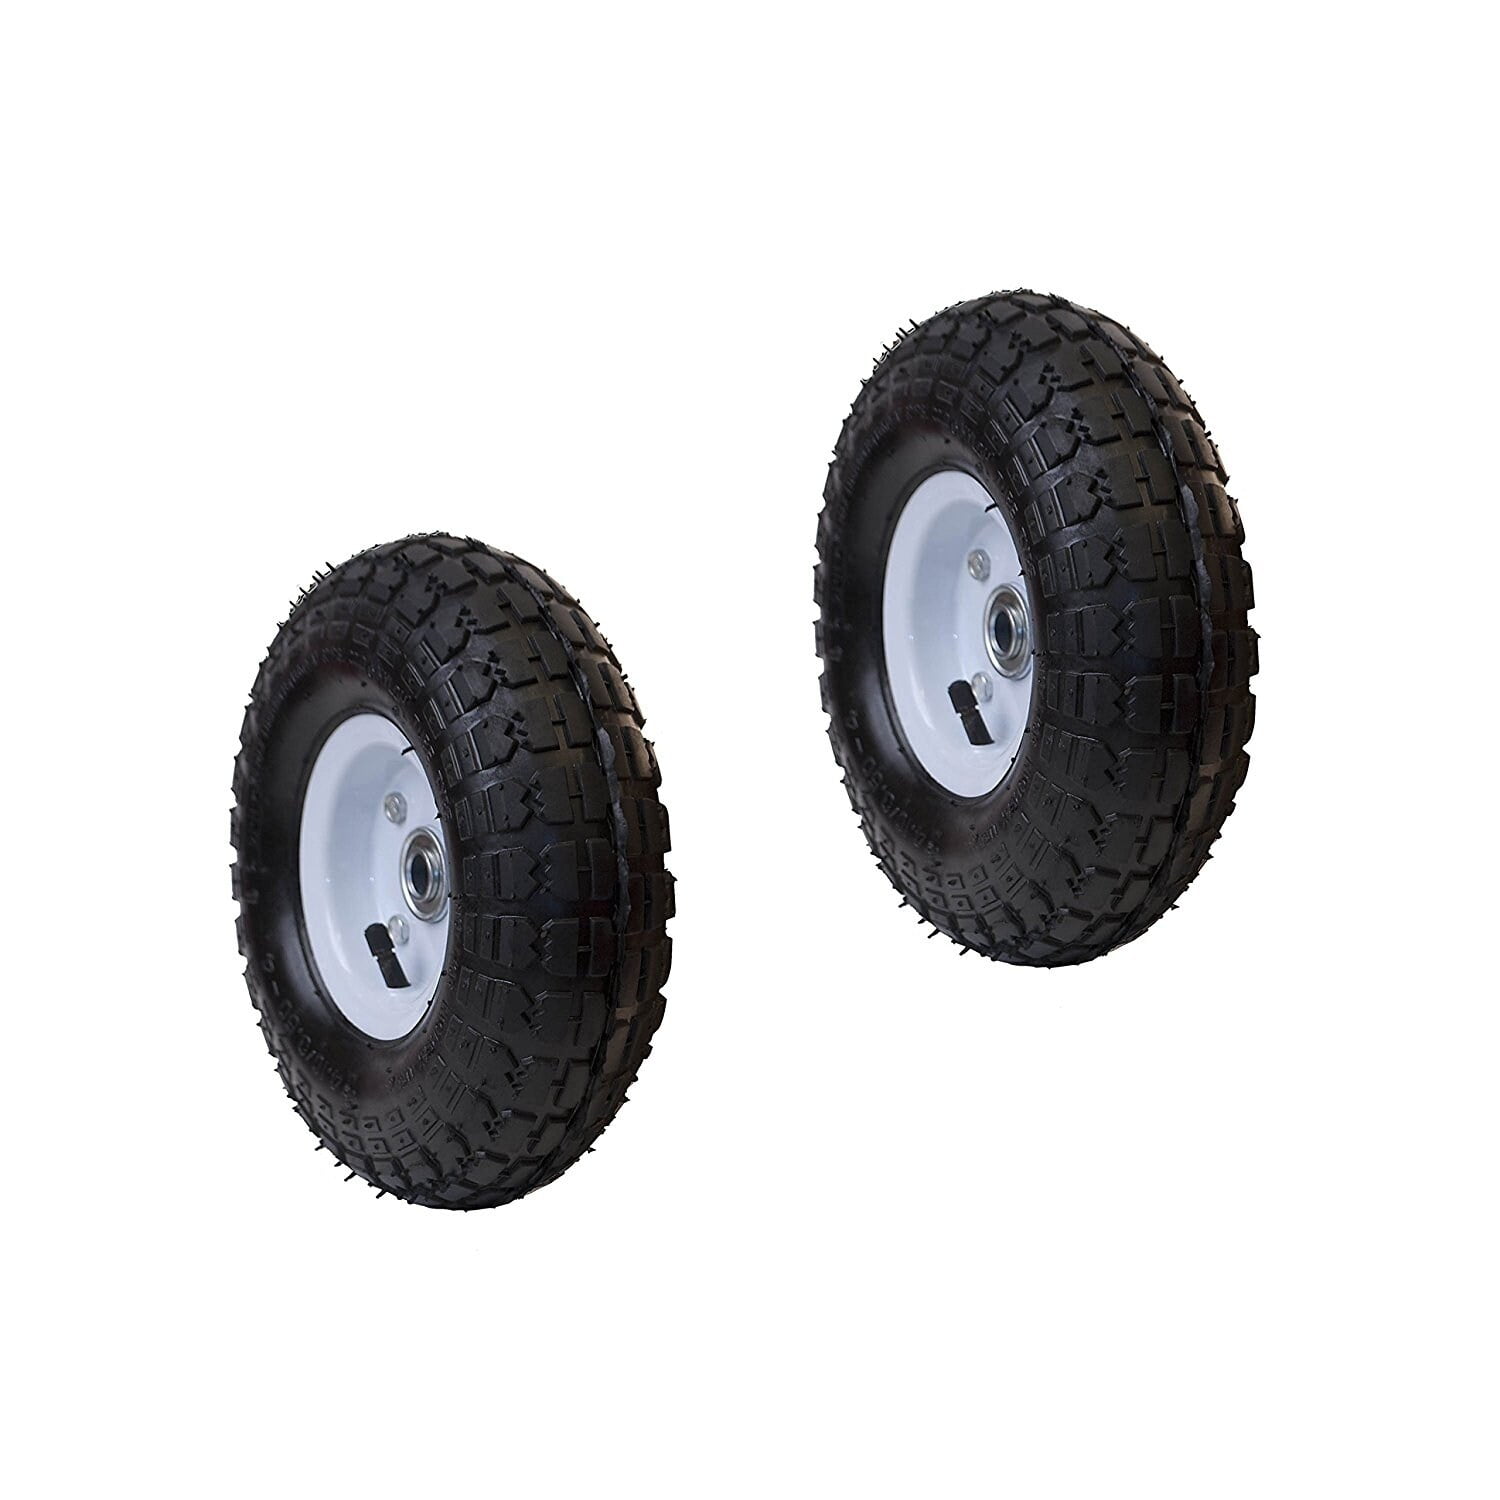 CY CHAOYA Oregon 72-107 Wheel Suitable for Replacement of Radio Flyer Wagon Wheels Barbecue Wheels Garbage Wheels and Replacement 9611 Wheelsage Wheels and Replacement 9611 Wheels 